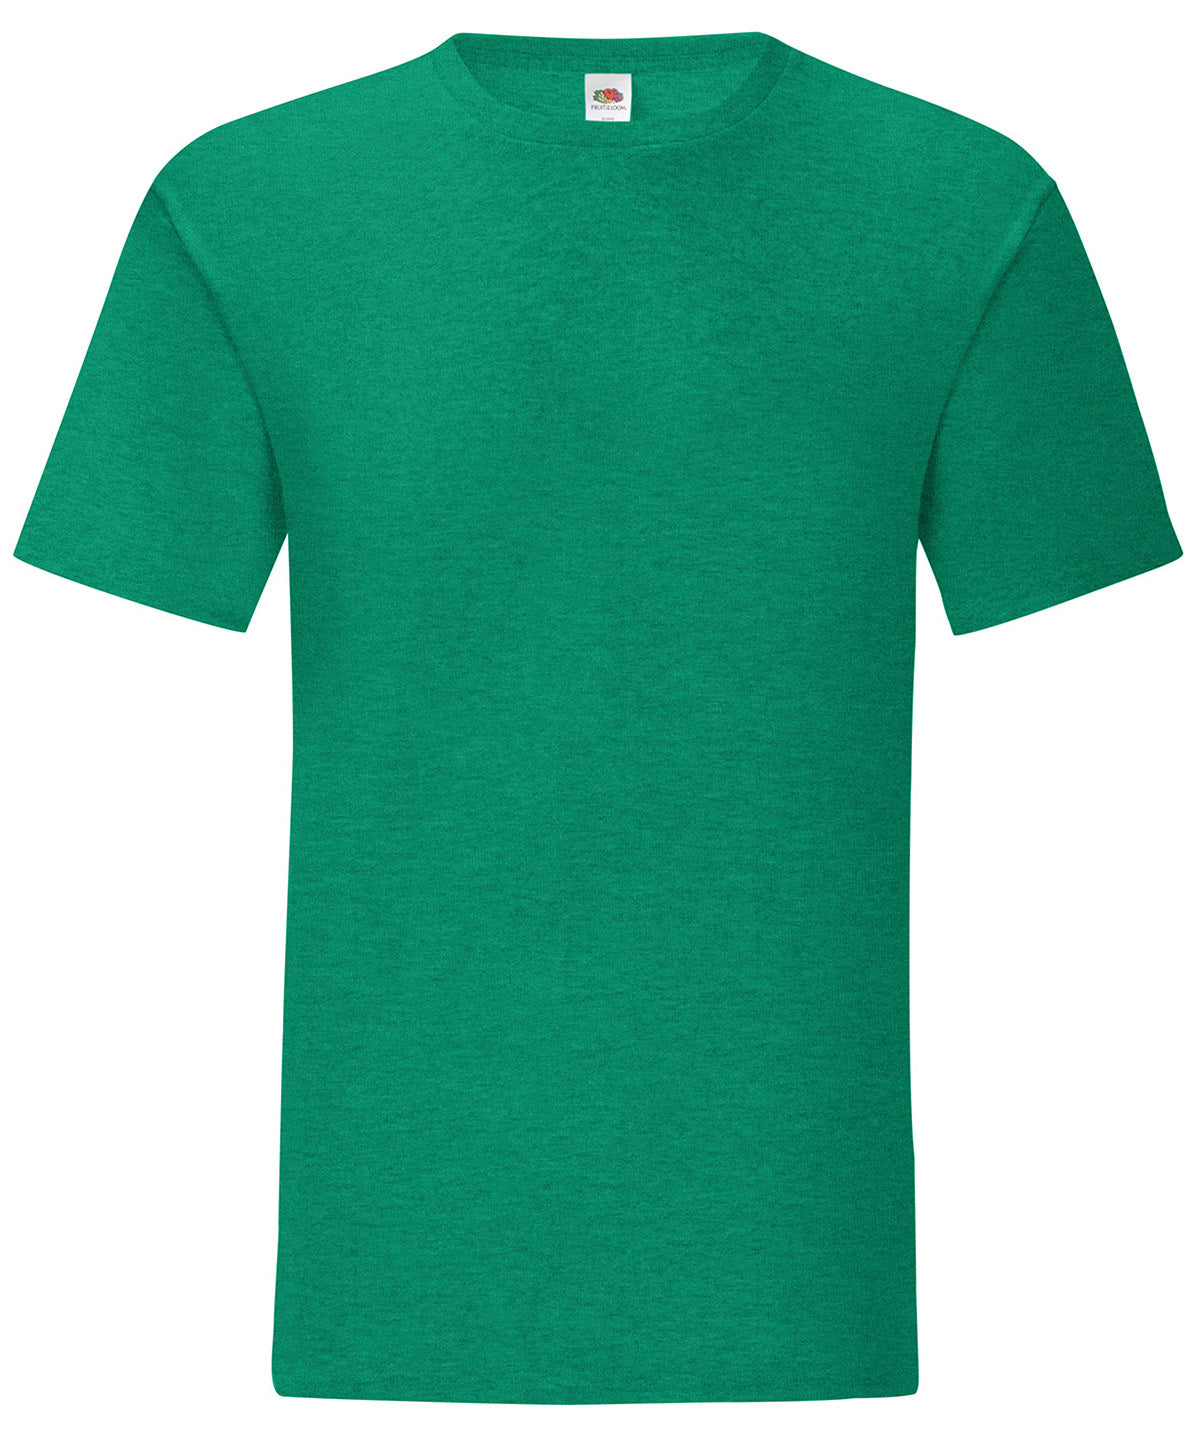 Fruit of the Loom Iconic 150 T Heather Green